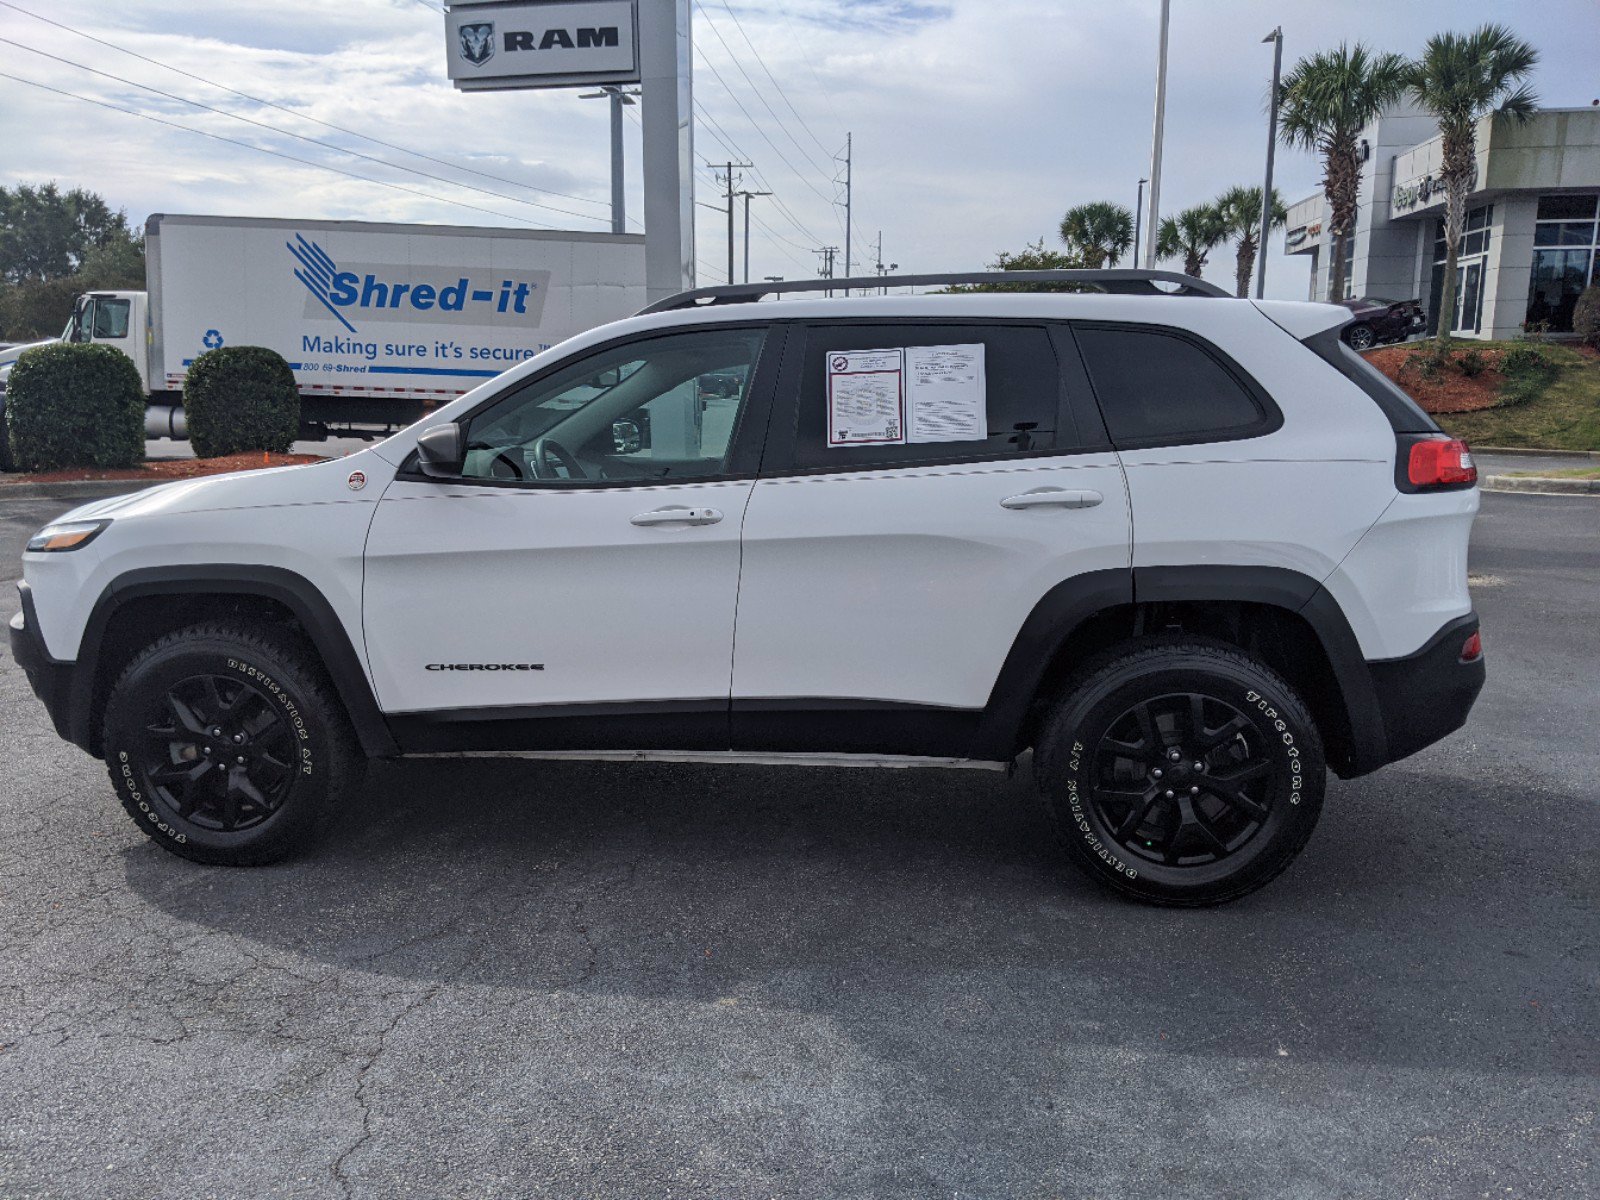 PreOwned 2014 Jeep Cherokee Trailhawk Sport Utility in